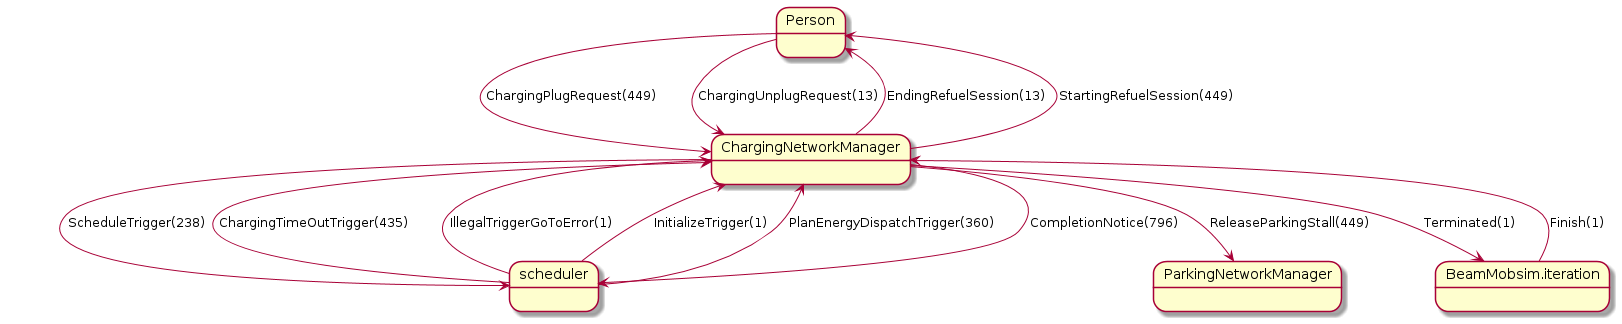 _images/dia-message-state-charging-network-manager.png